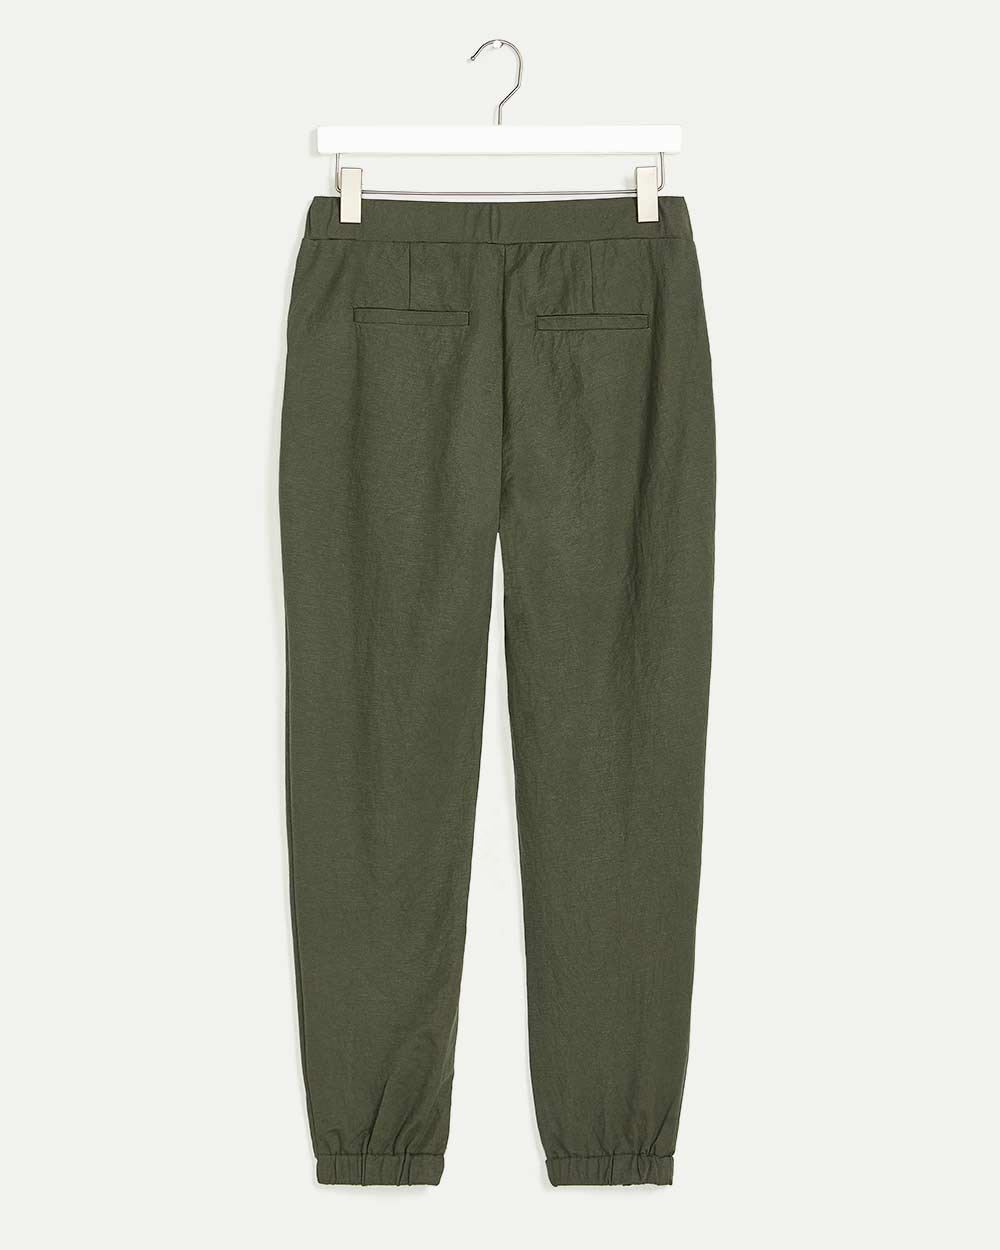 Pull On Knit Pique Jogger Pants